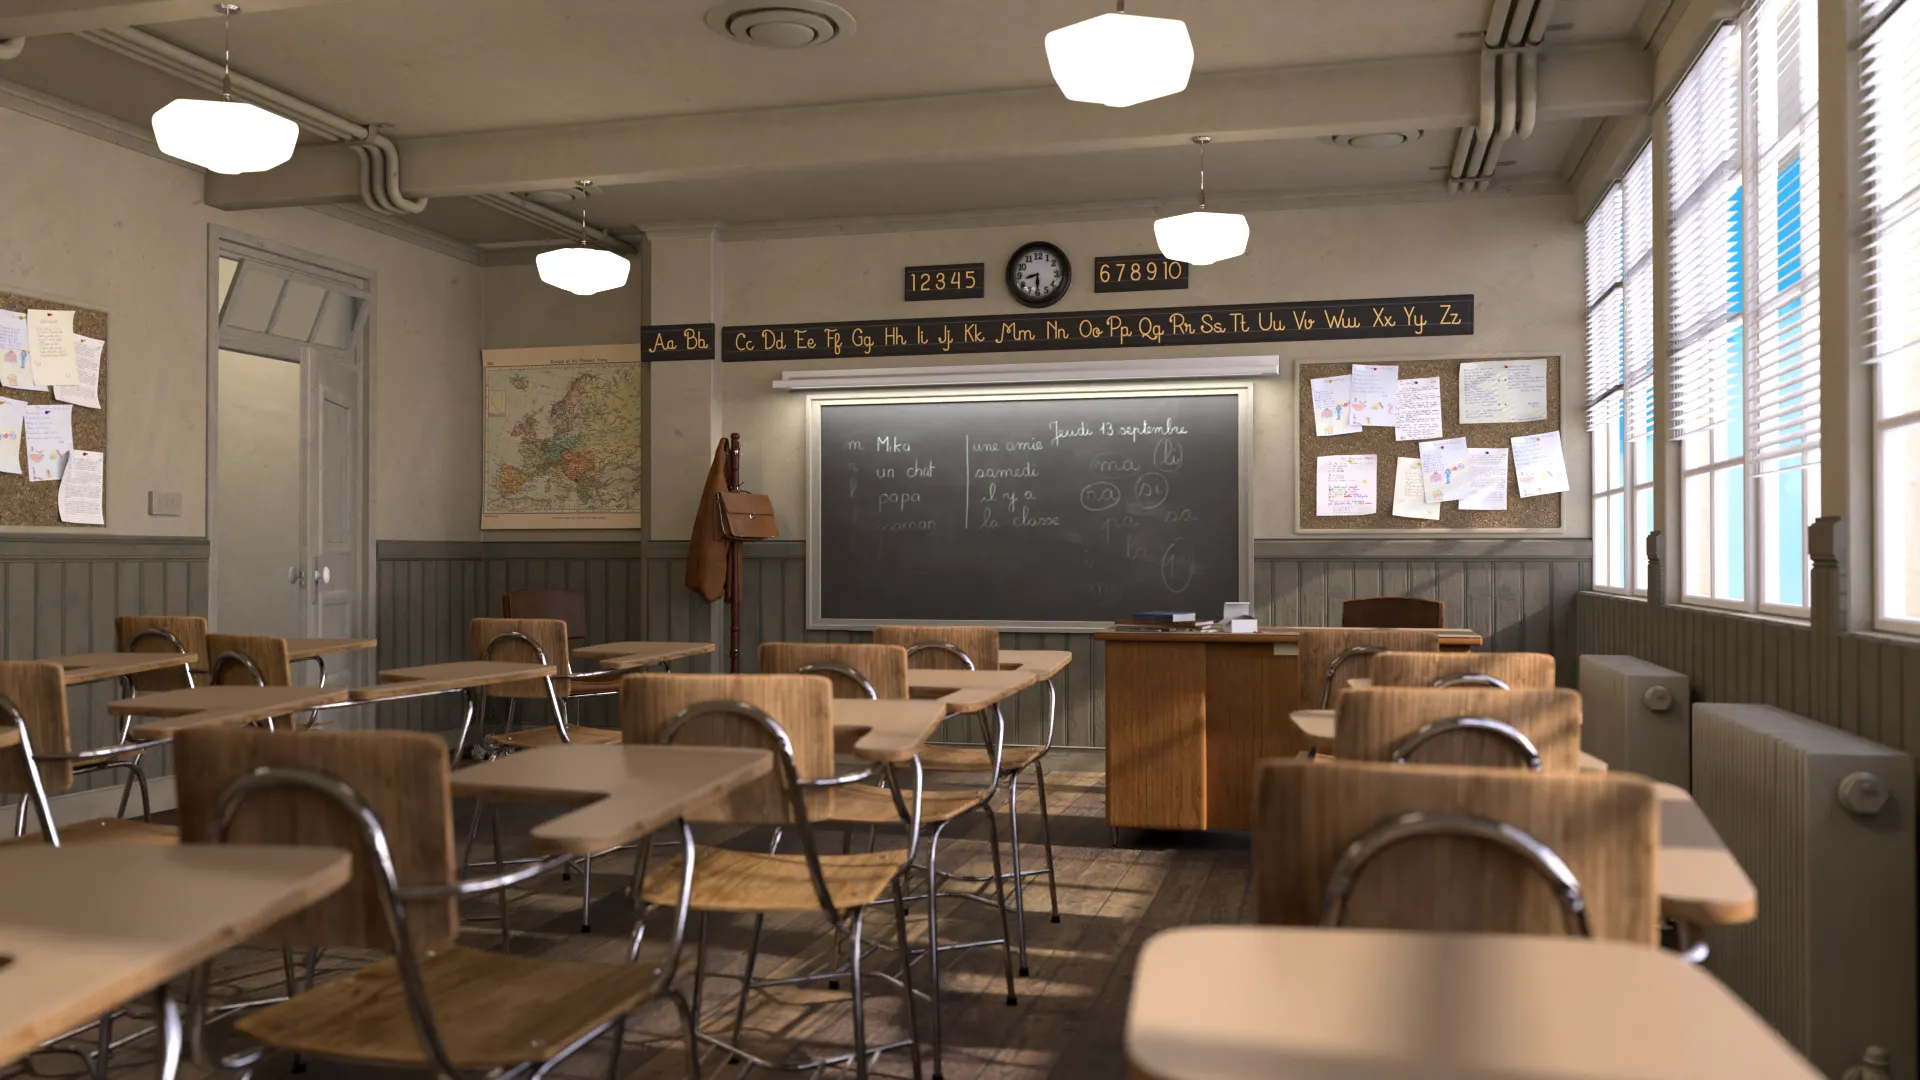 A high quality 3D render showing a classroom